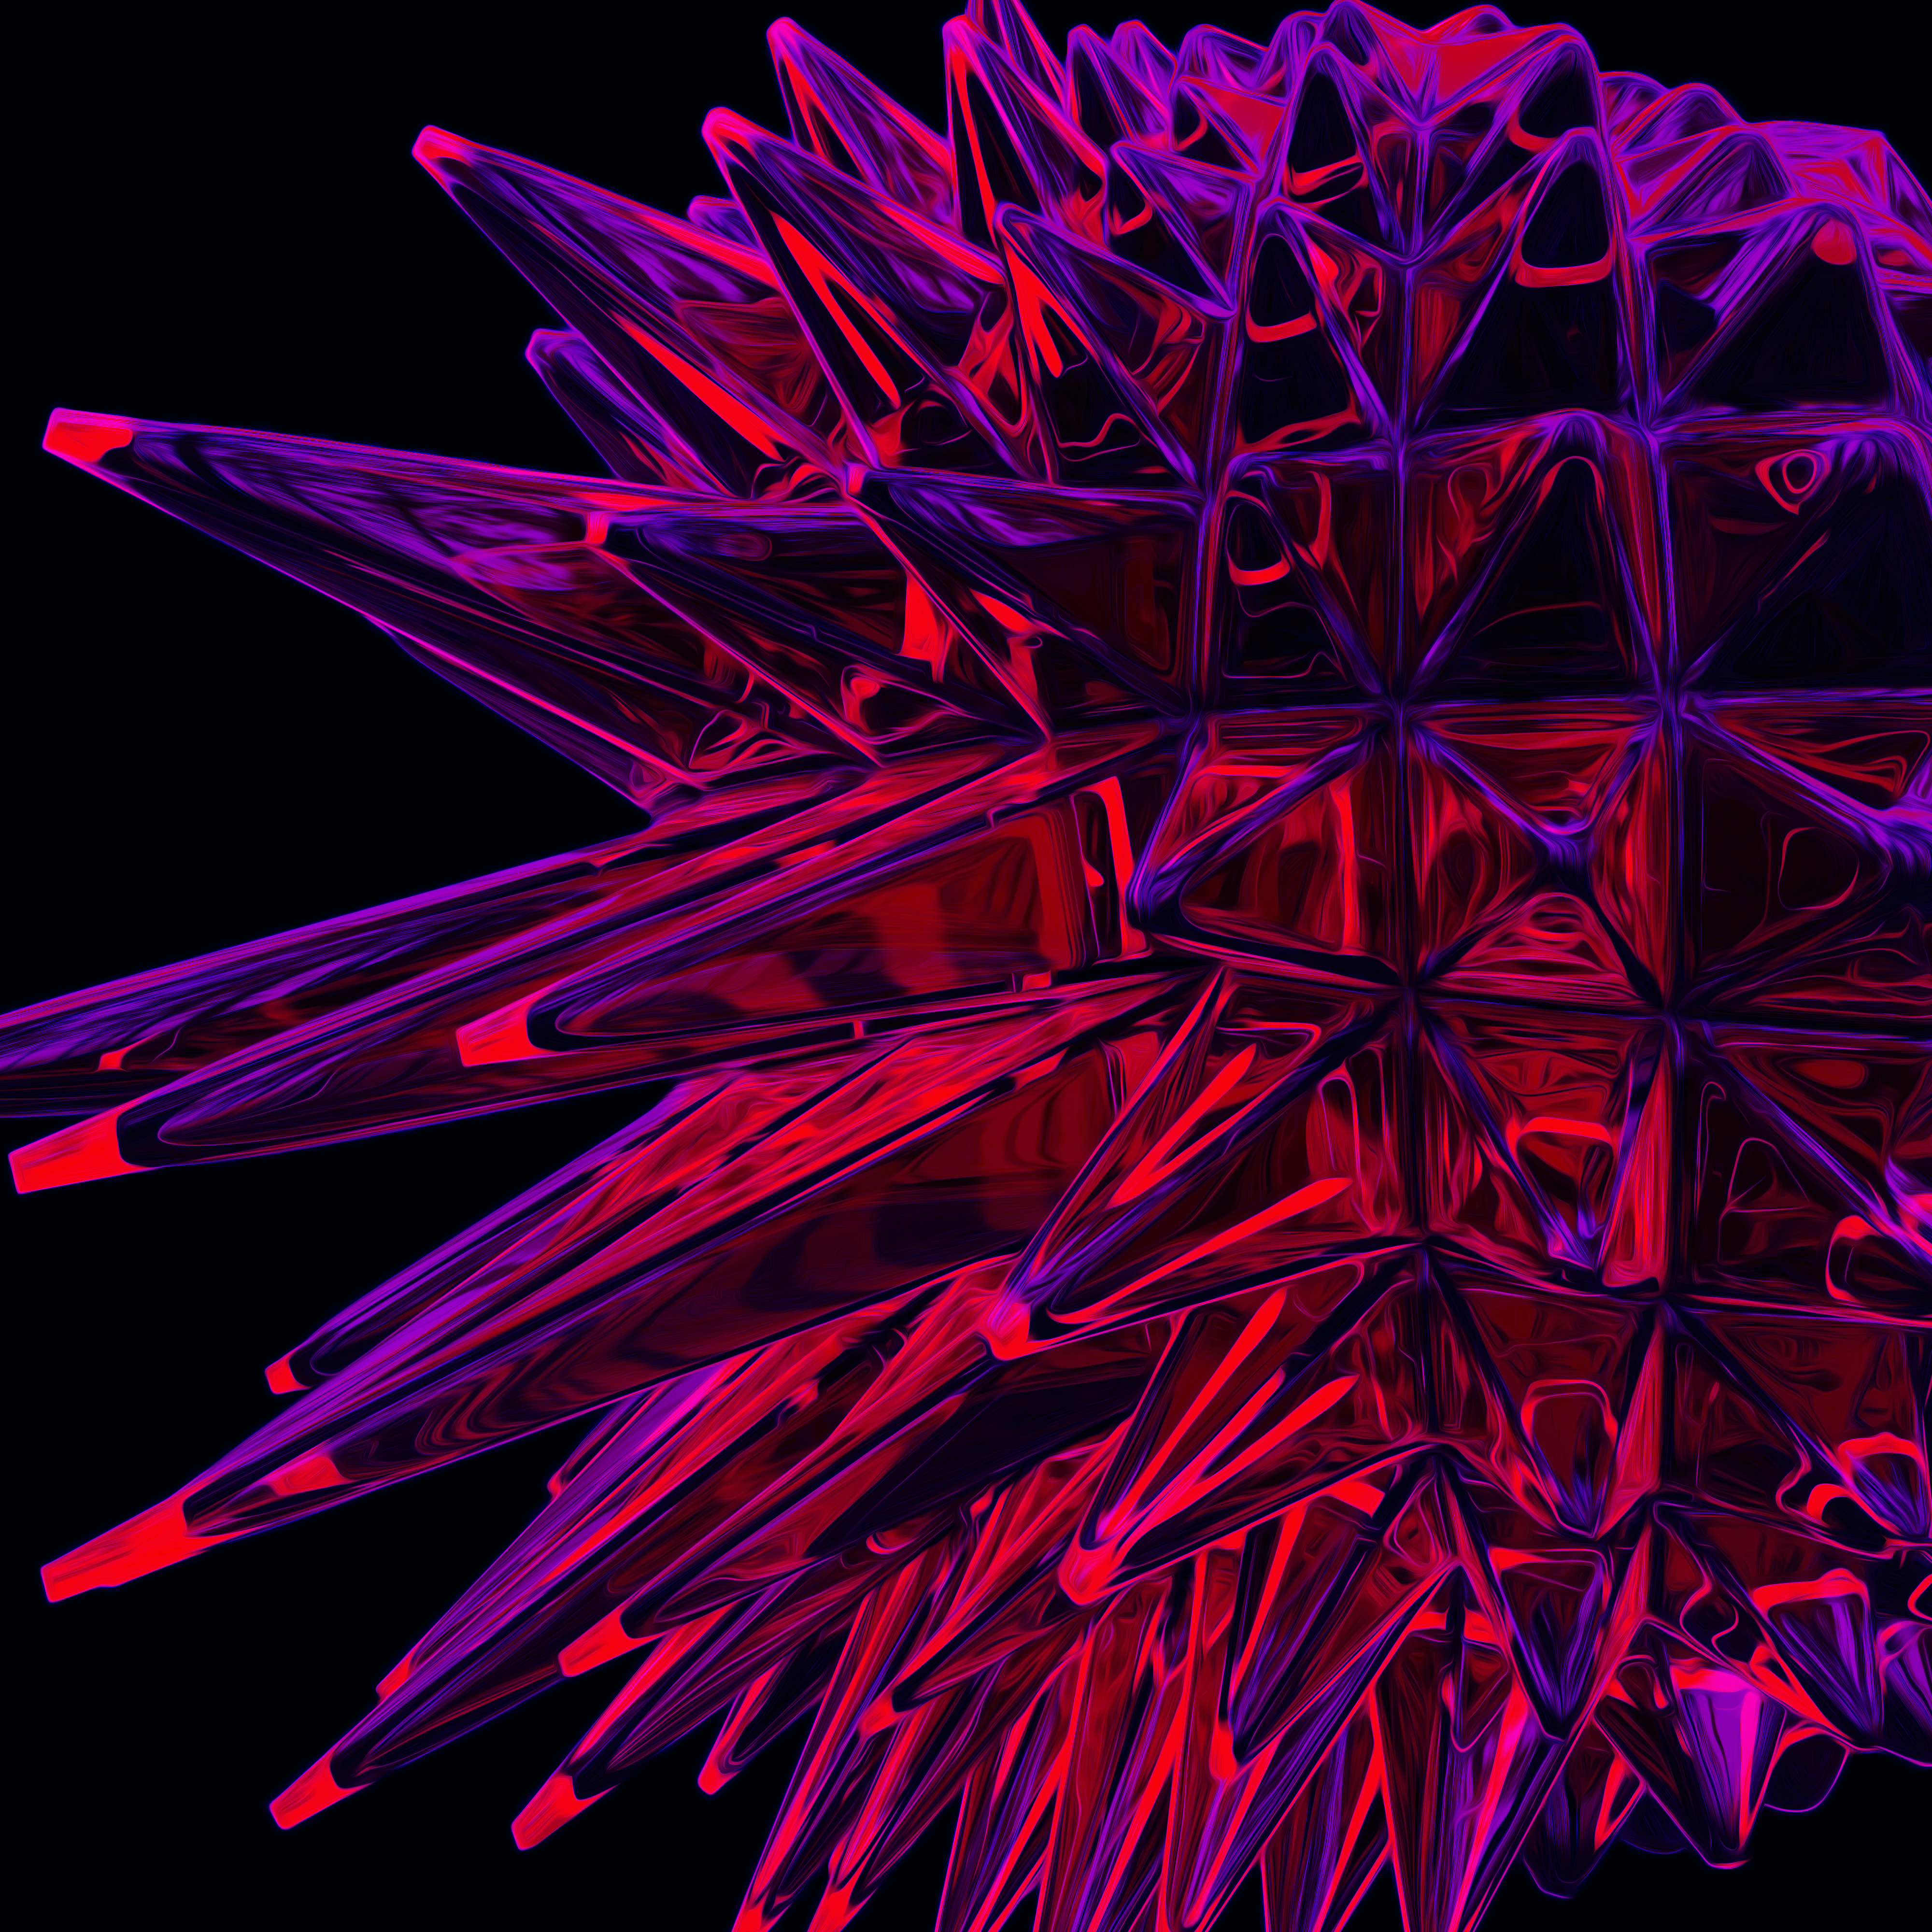 crystal, acute, 3d, purple, violet, red, structure, spiny, barbed, sharp